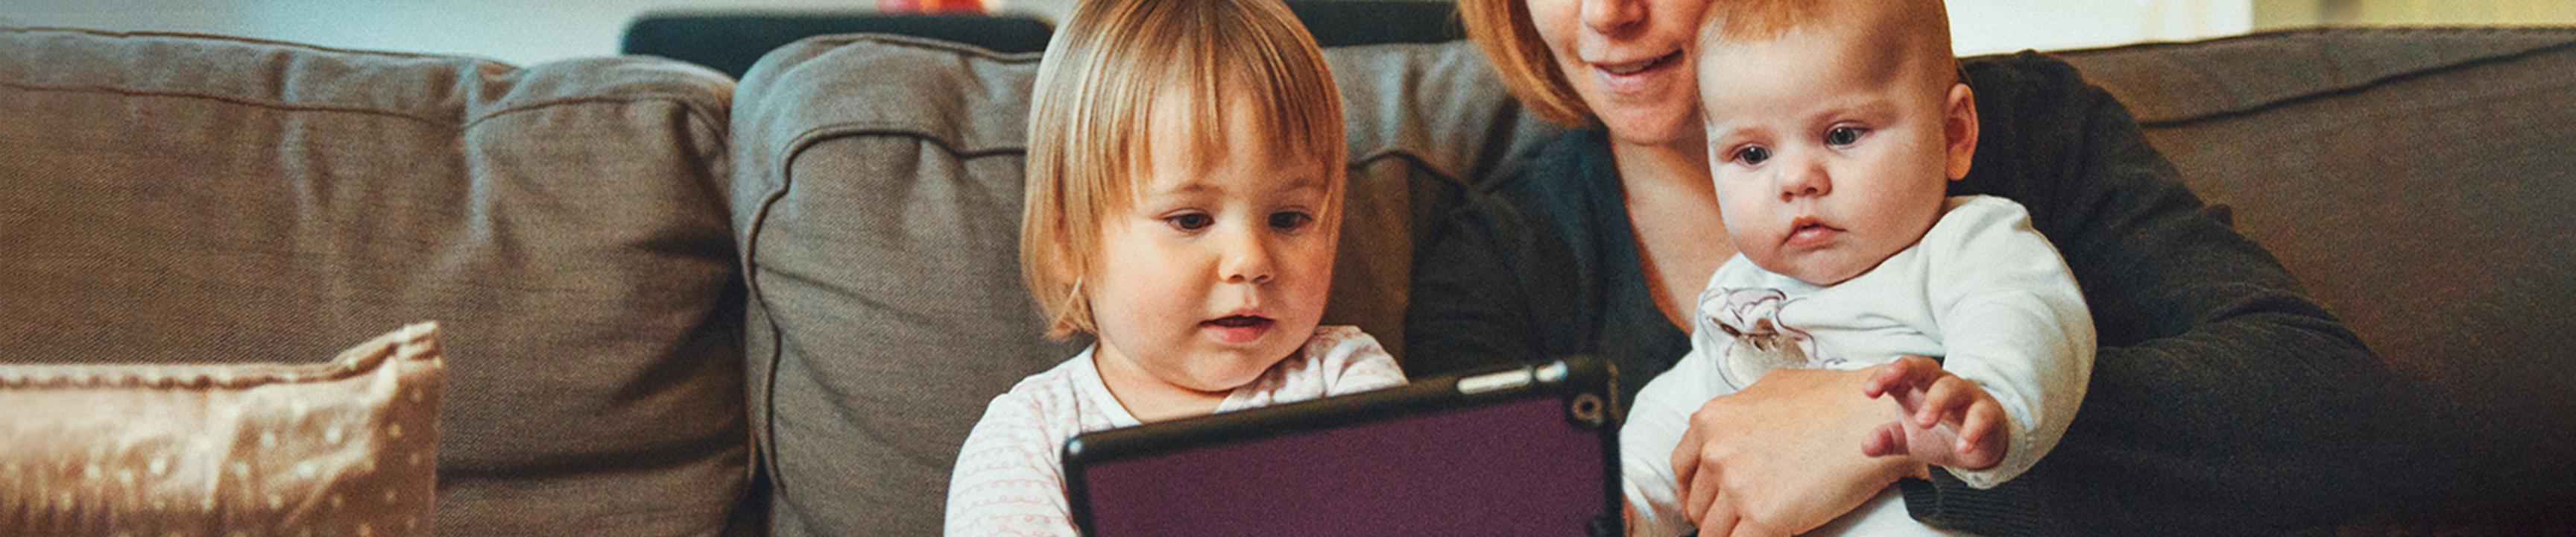 baby and toddler looking at a tablet device